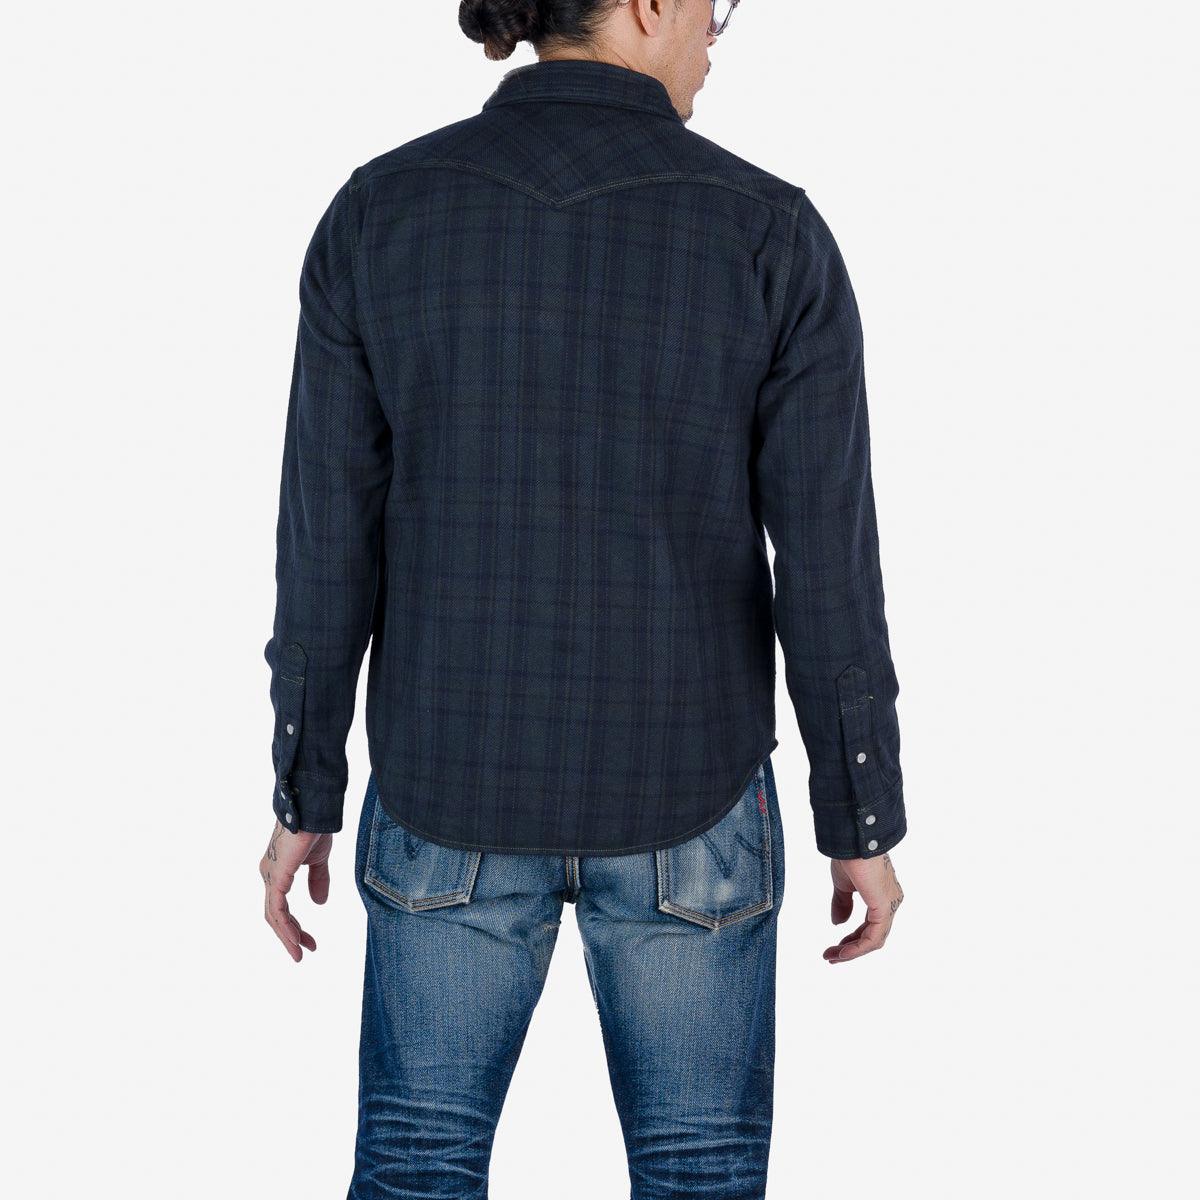 Image showing the IHSH-337-OD - Ultra Heavy Flannel Tartan Check Western Shirt - Green Overdyed Black which is a Shirts described by the following info Iron Heart, New, Released, Shirts, Tops and sold on the IRON HEART GERMANY online store